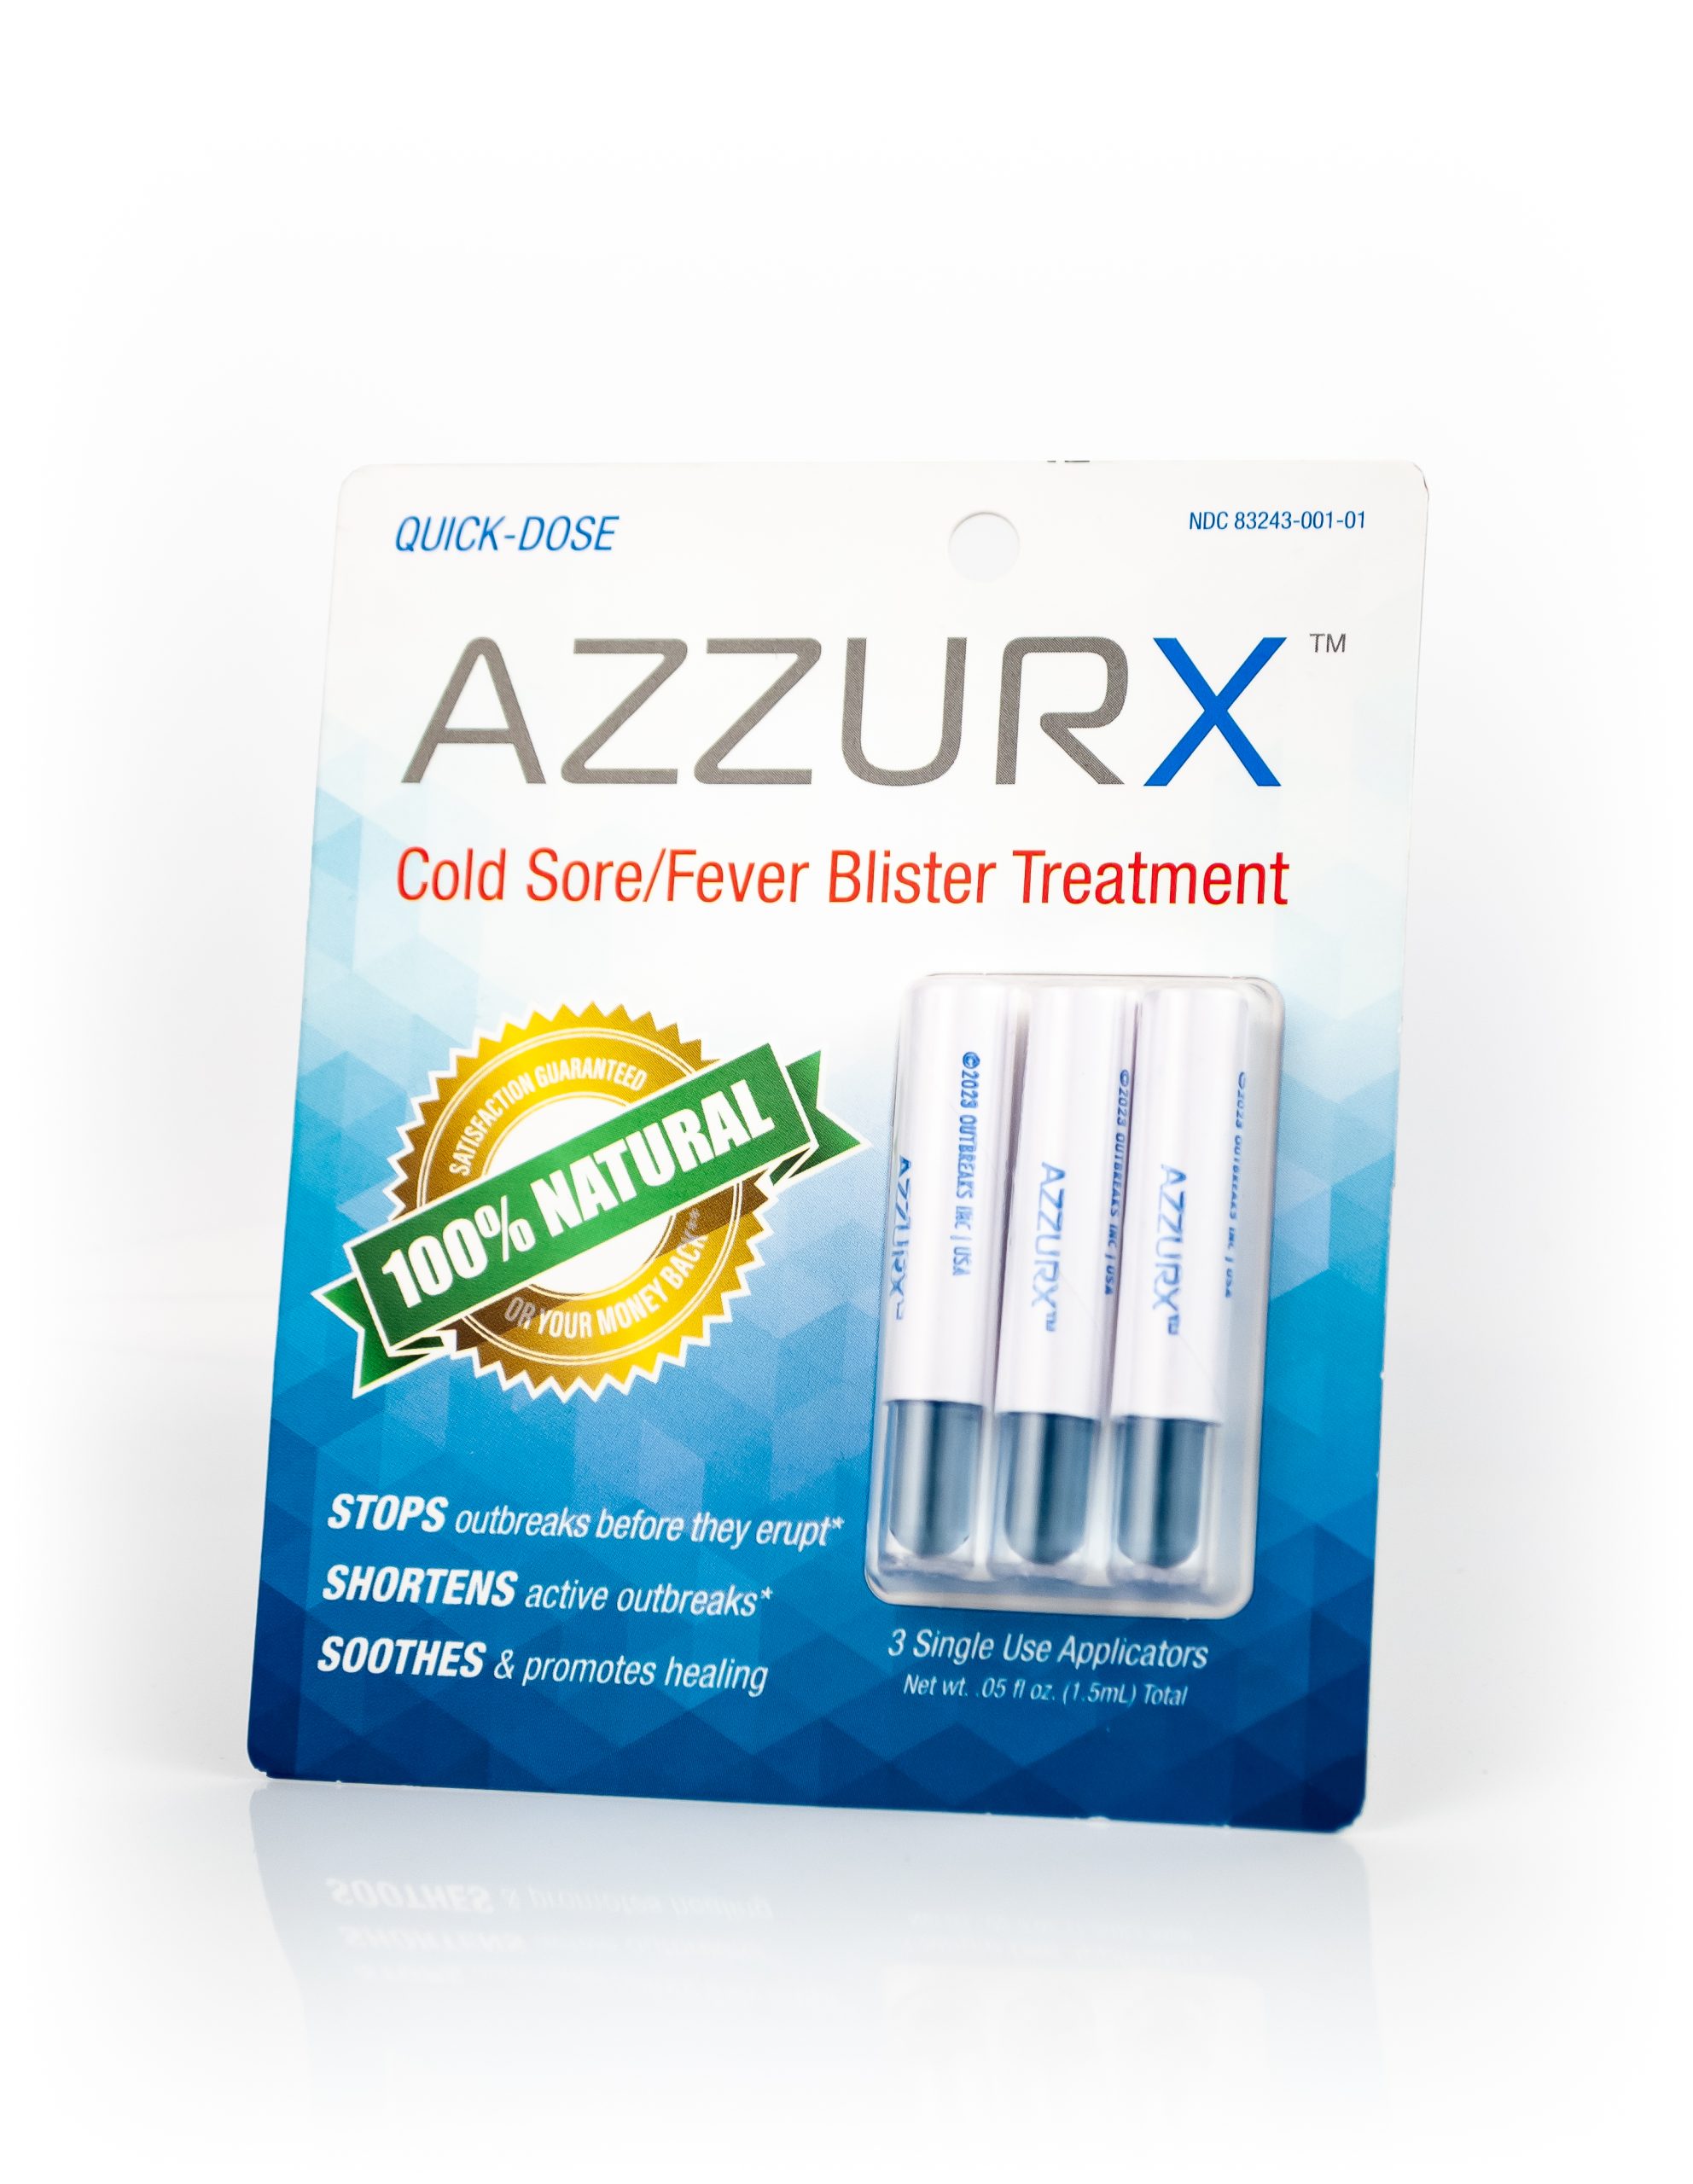 Azzurx product package